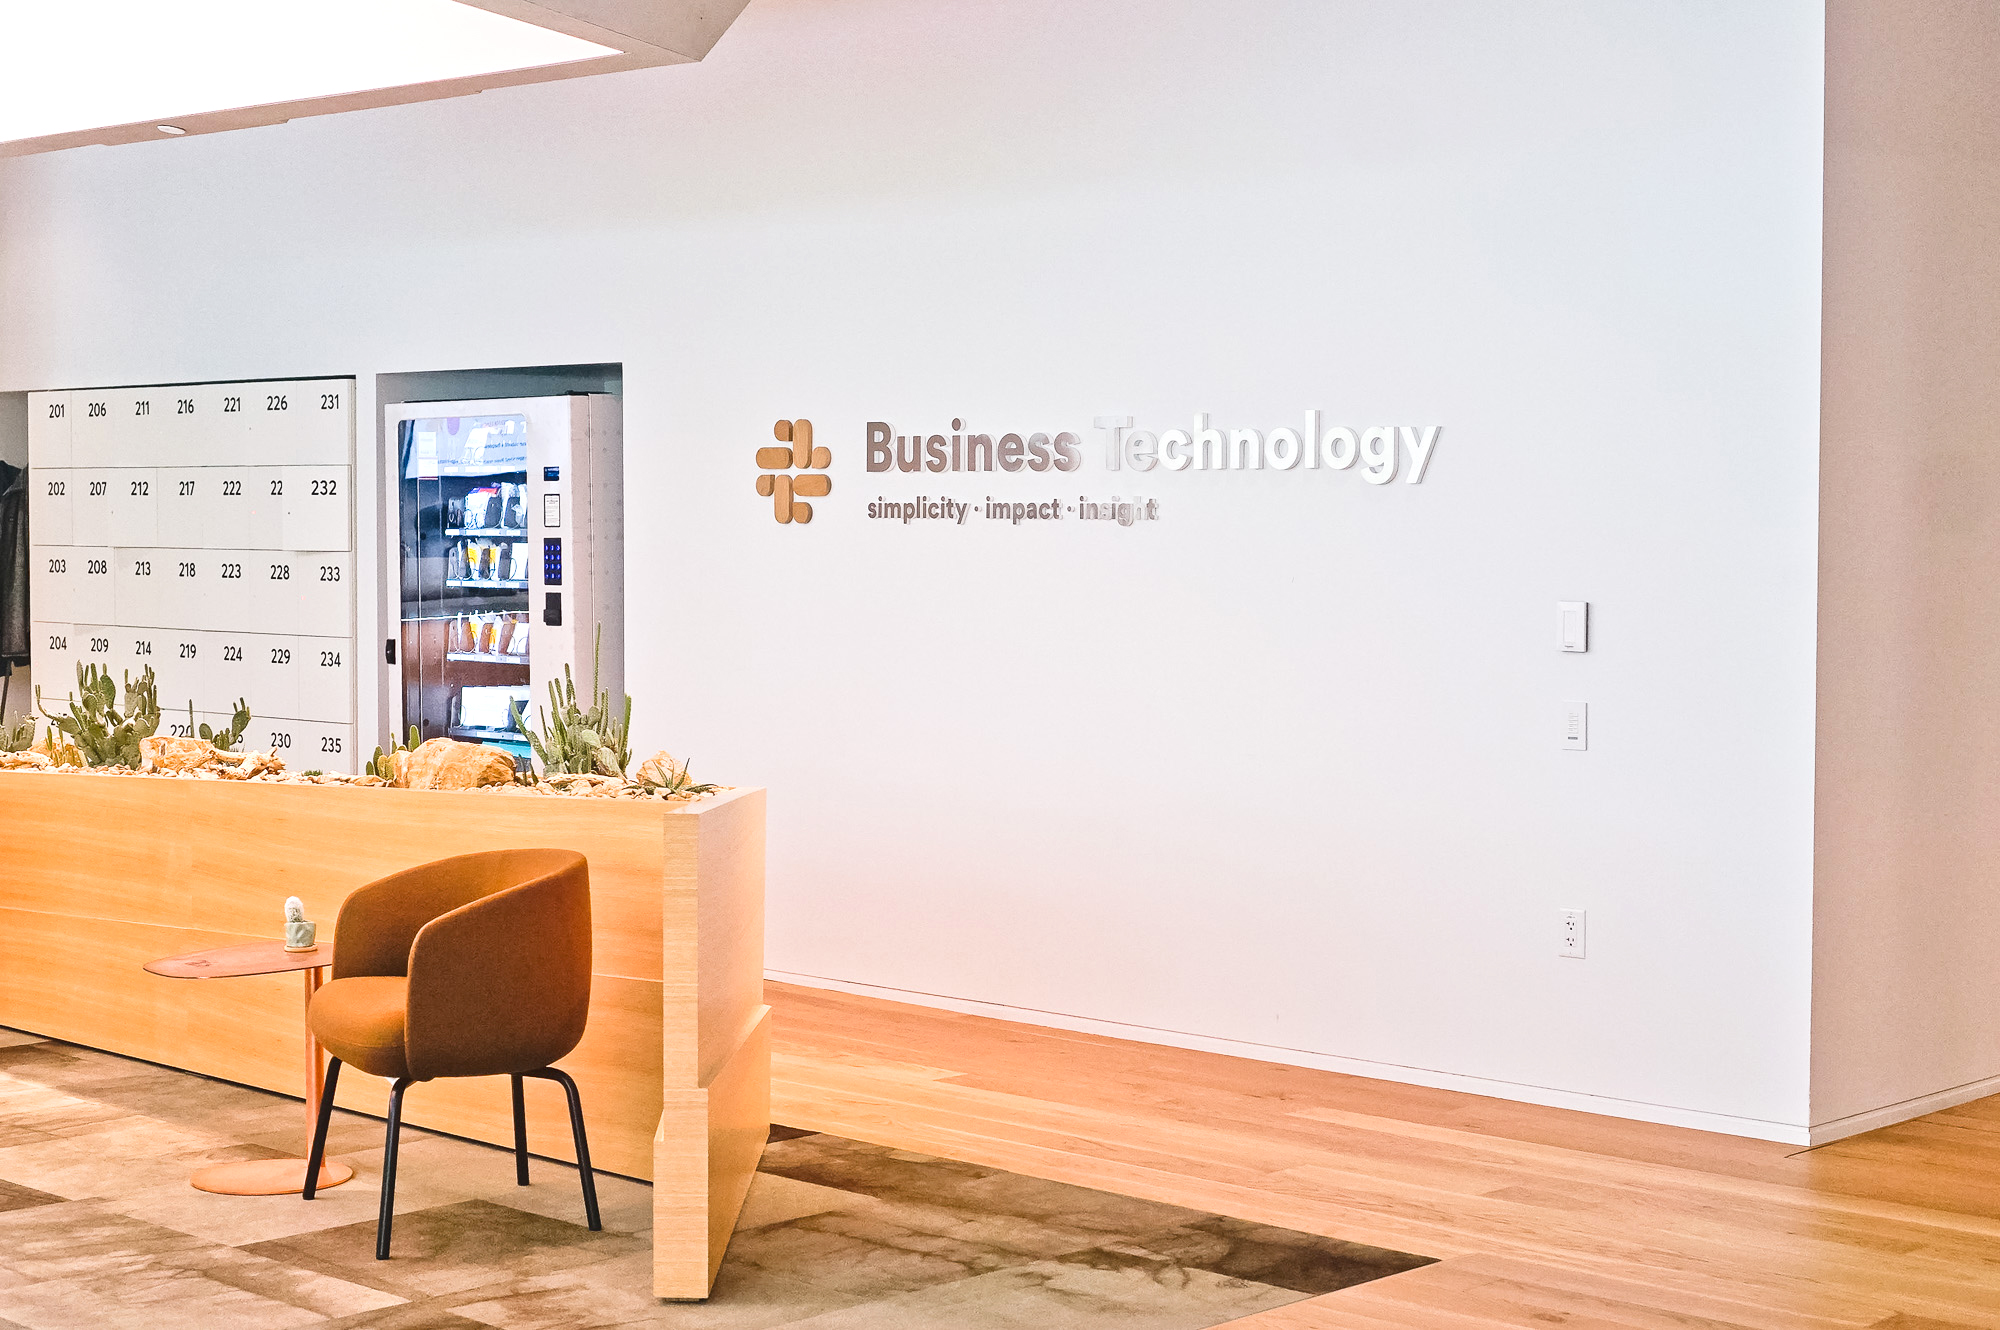 Wood and metal sign for the Business Technology department at Slack, an American cloud-based set of team collaboration tools and services.